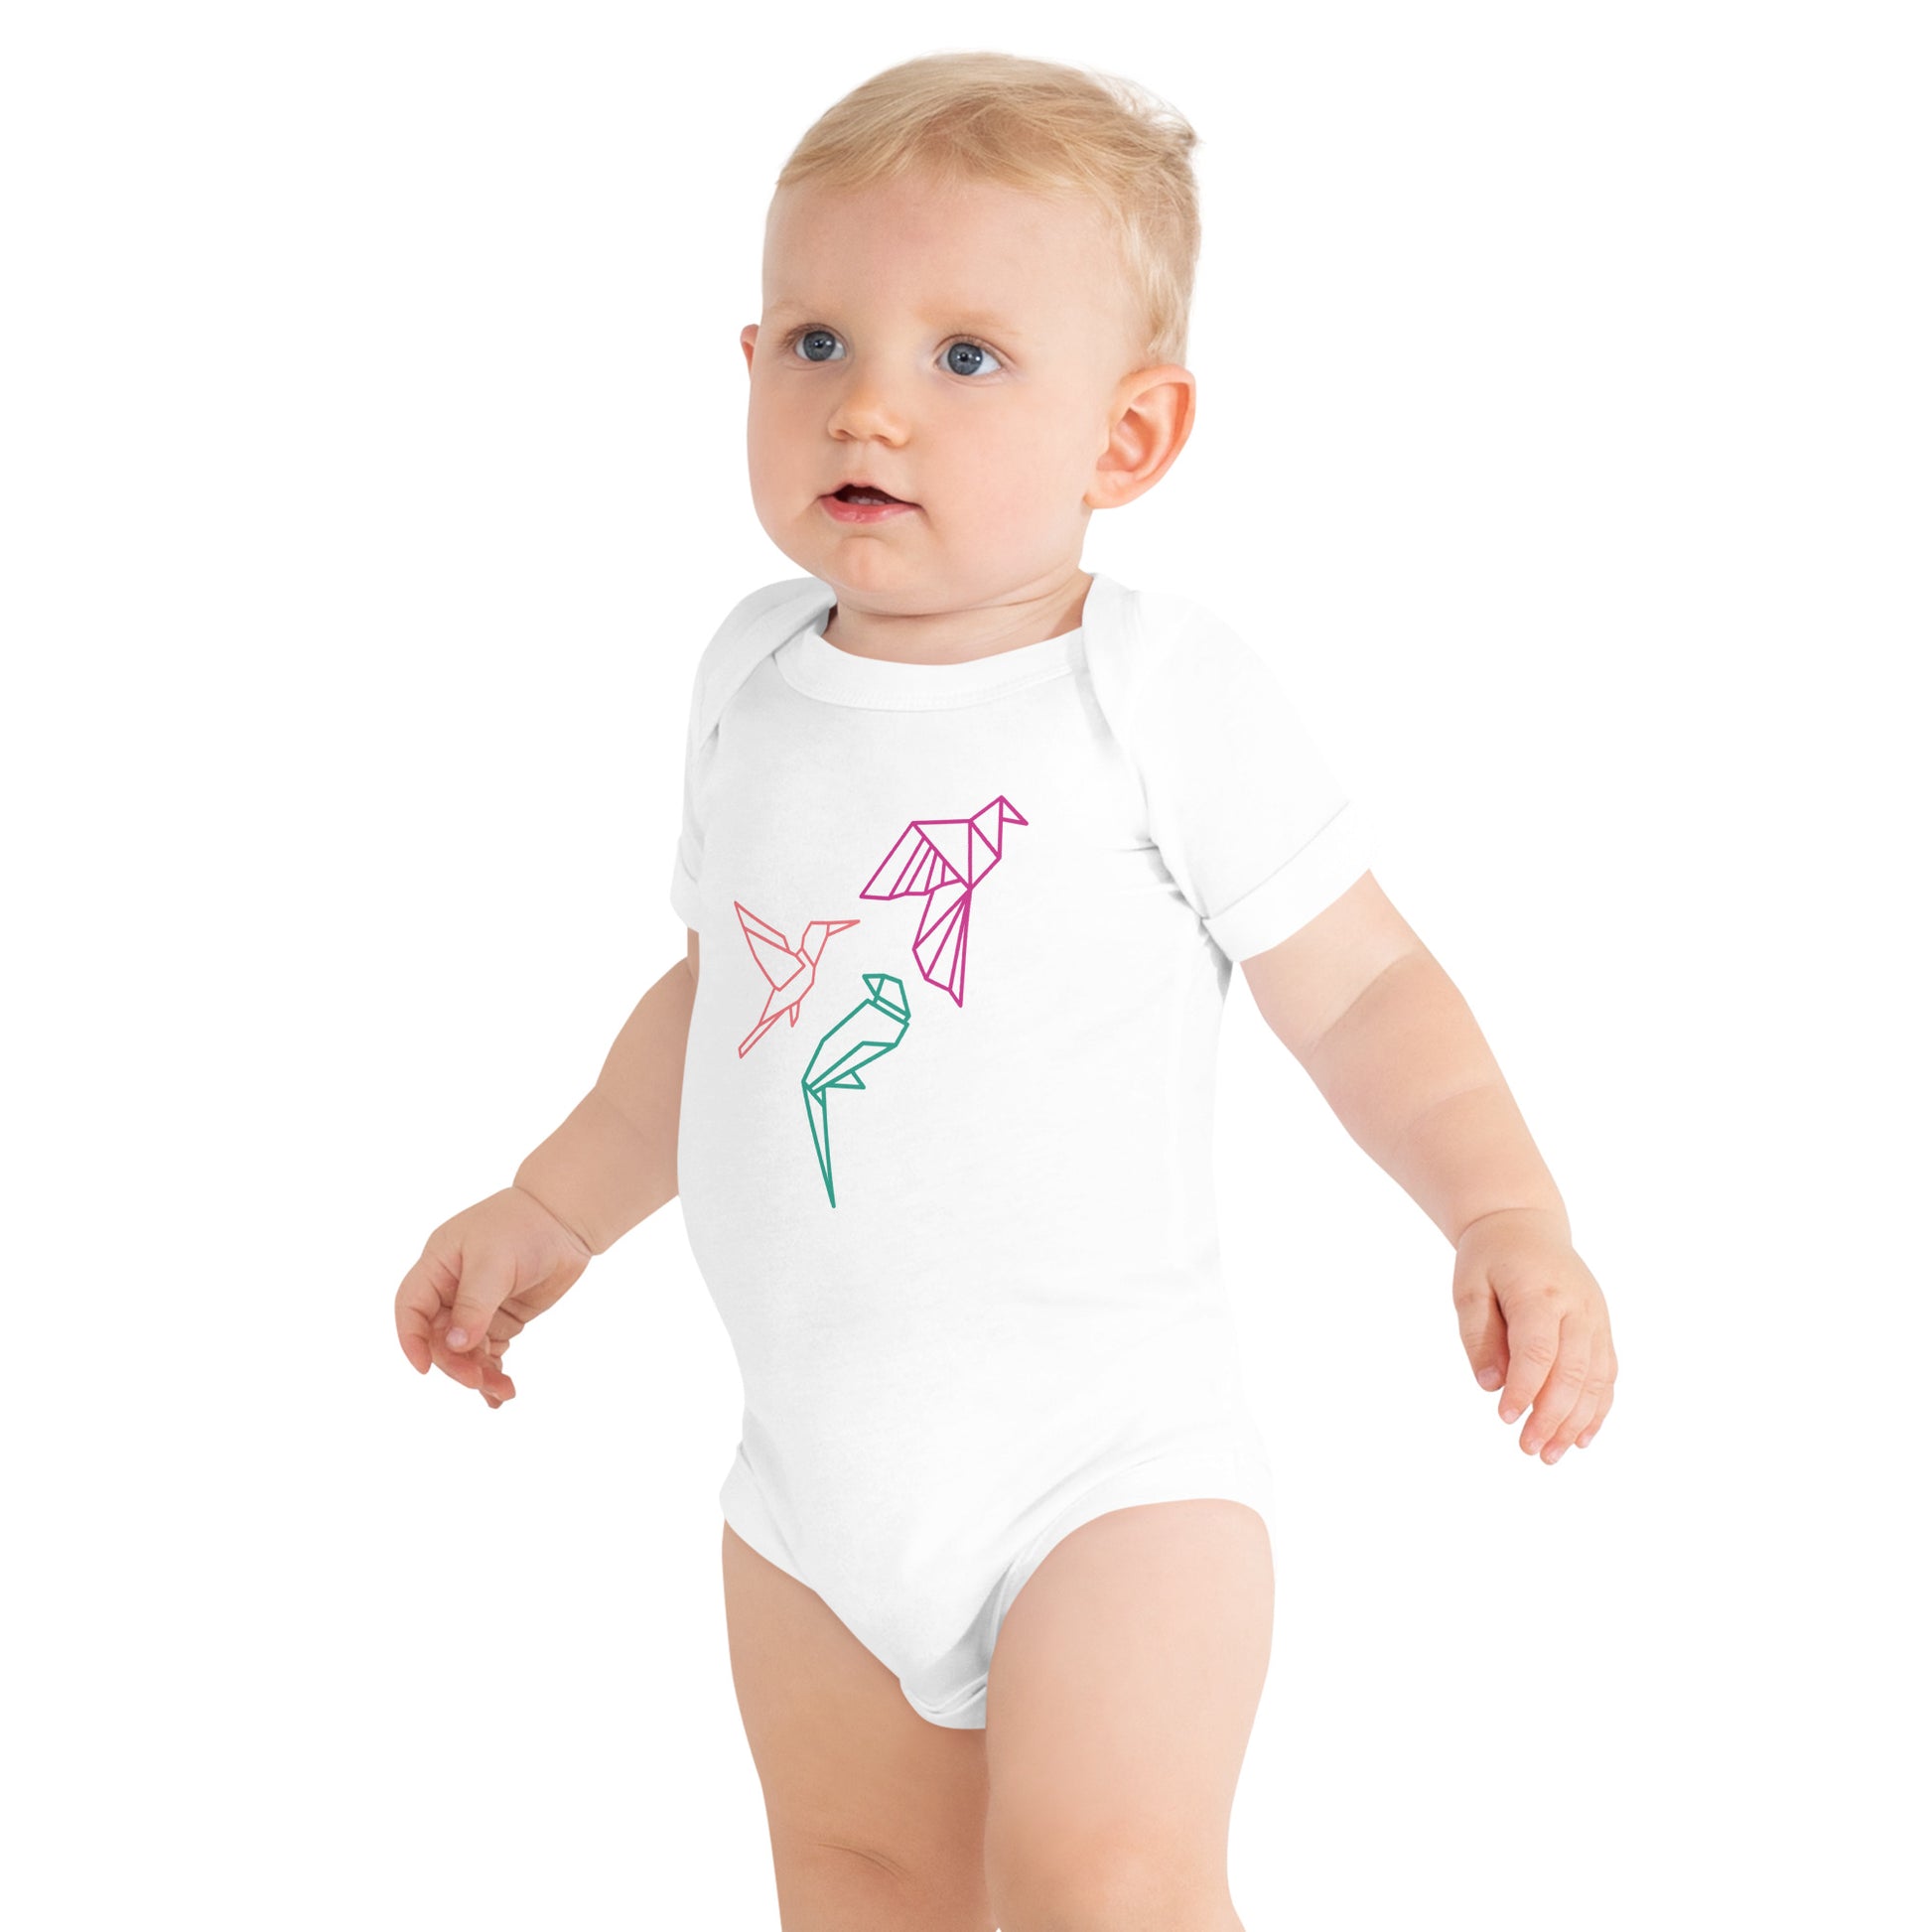 Baby with a white short sleeve one piece with three birds in Orange, Green and Pink